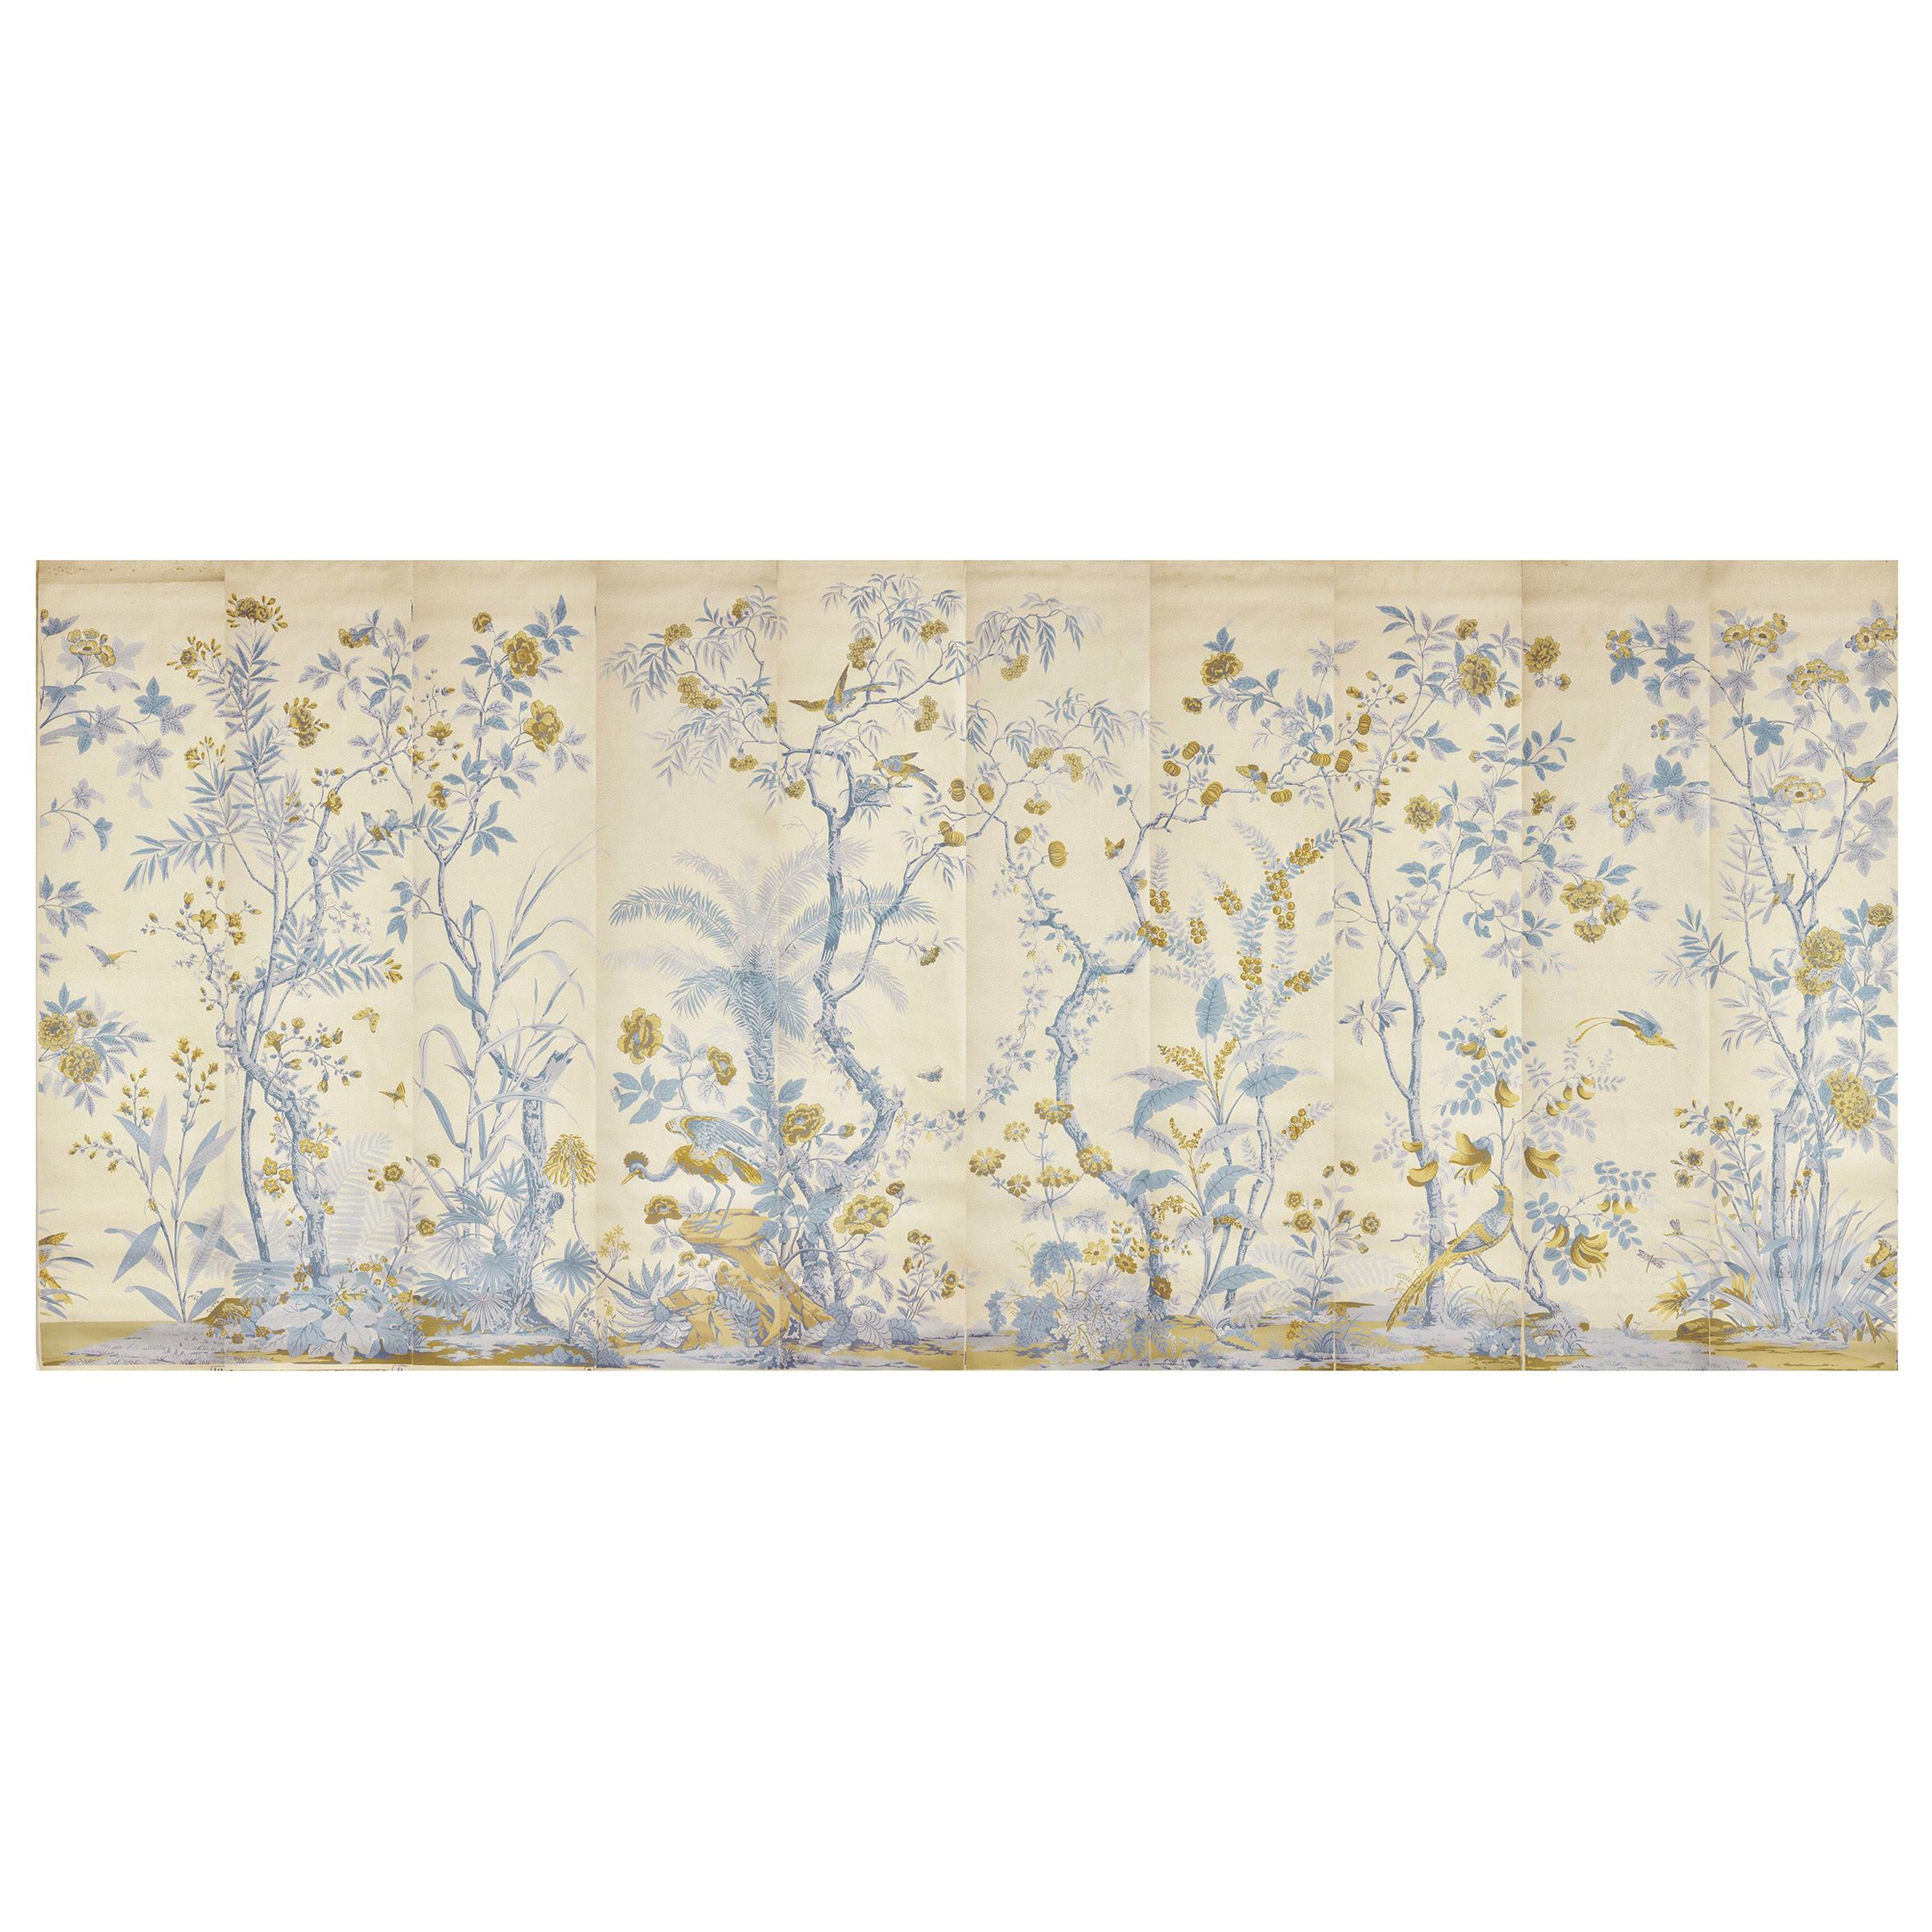 Zuber, 'Decor Chinois' Hand Wood Blocked Scenic Wall Paper in Cornflake Blue For Sale